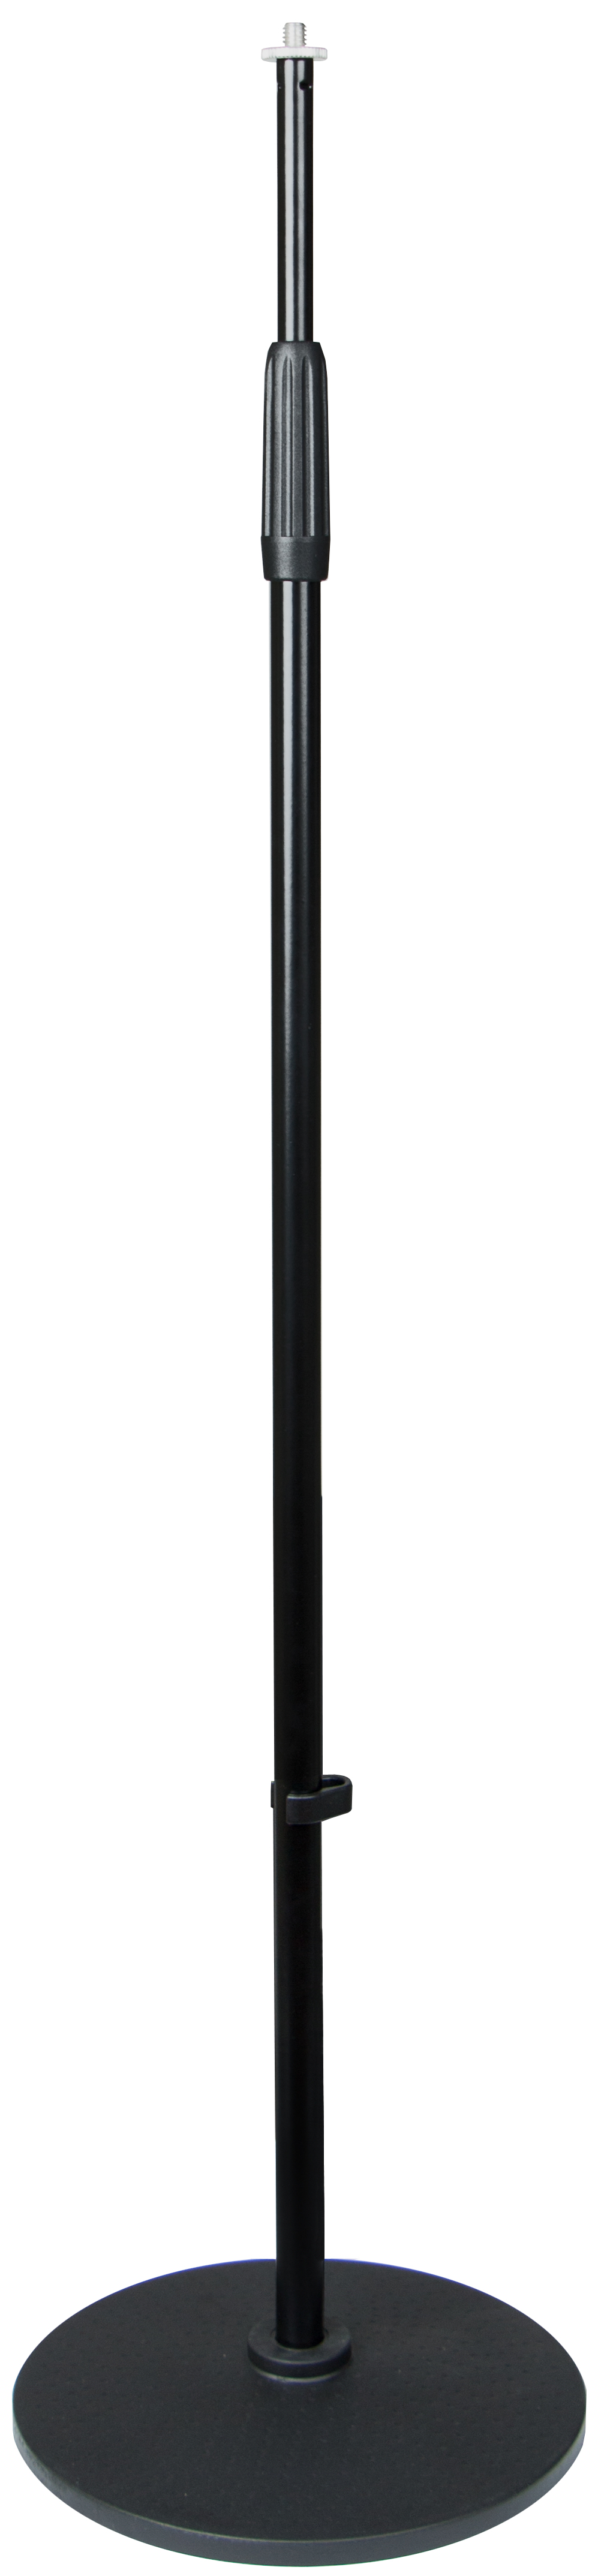 Universal straight microphone stand